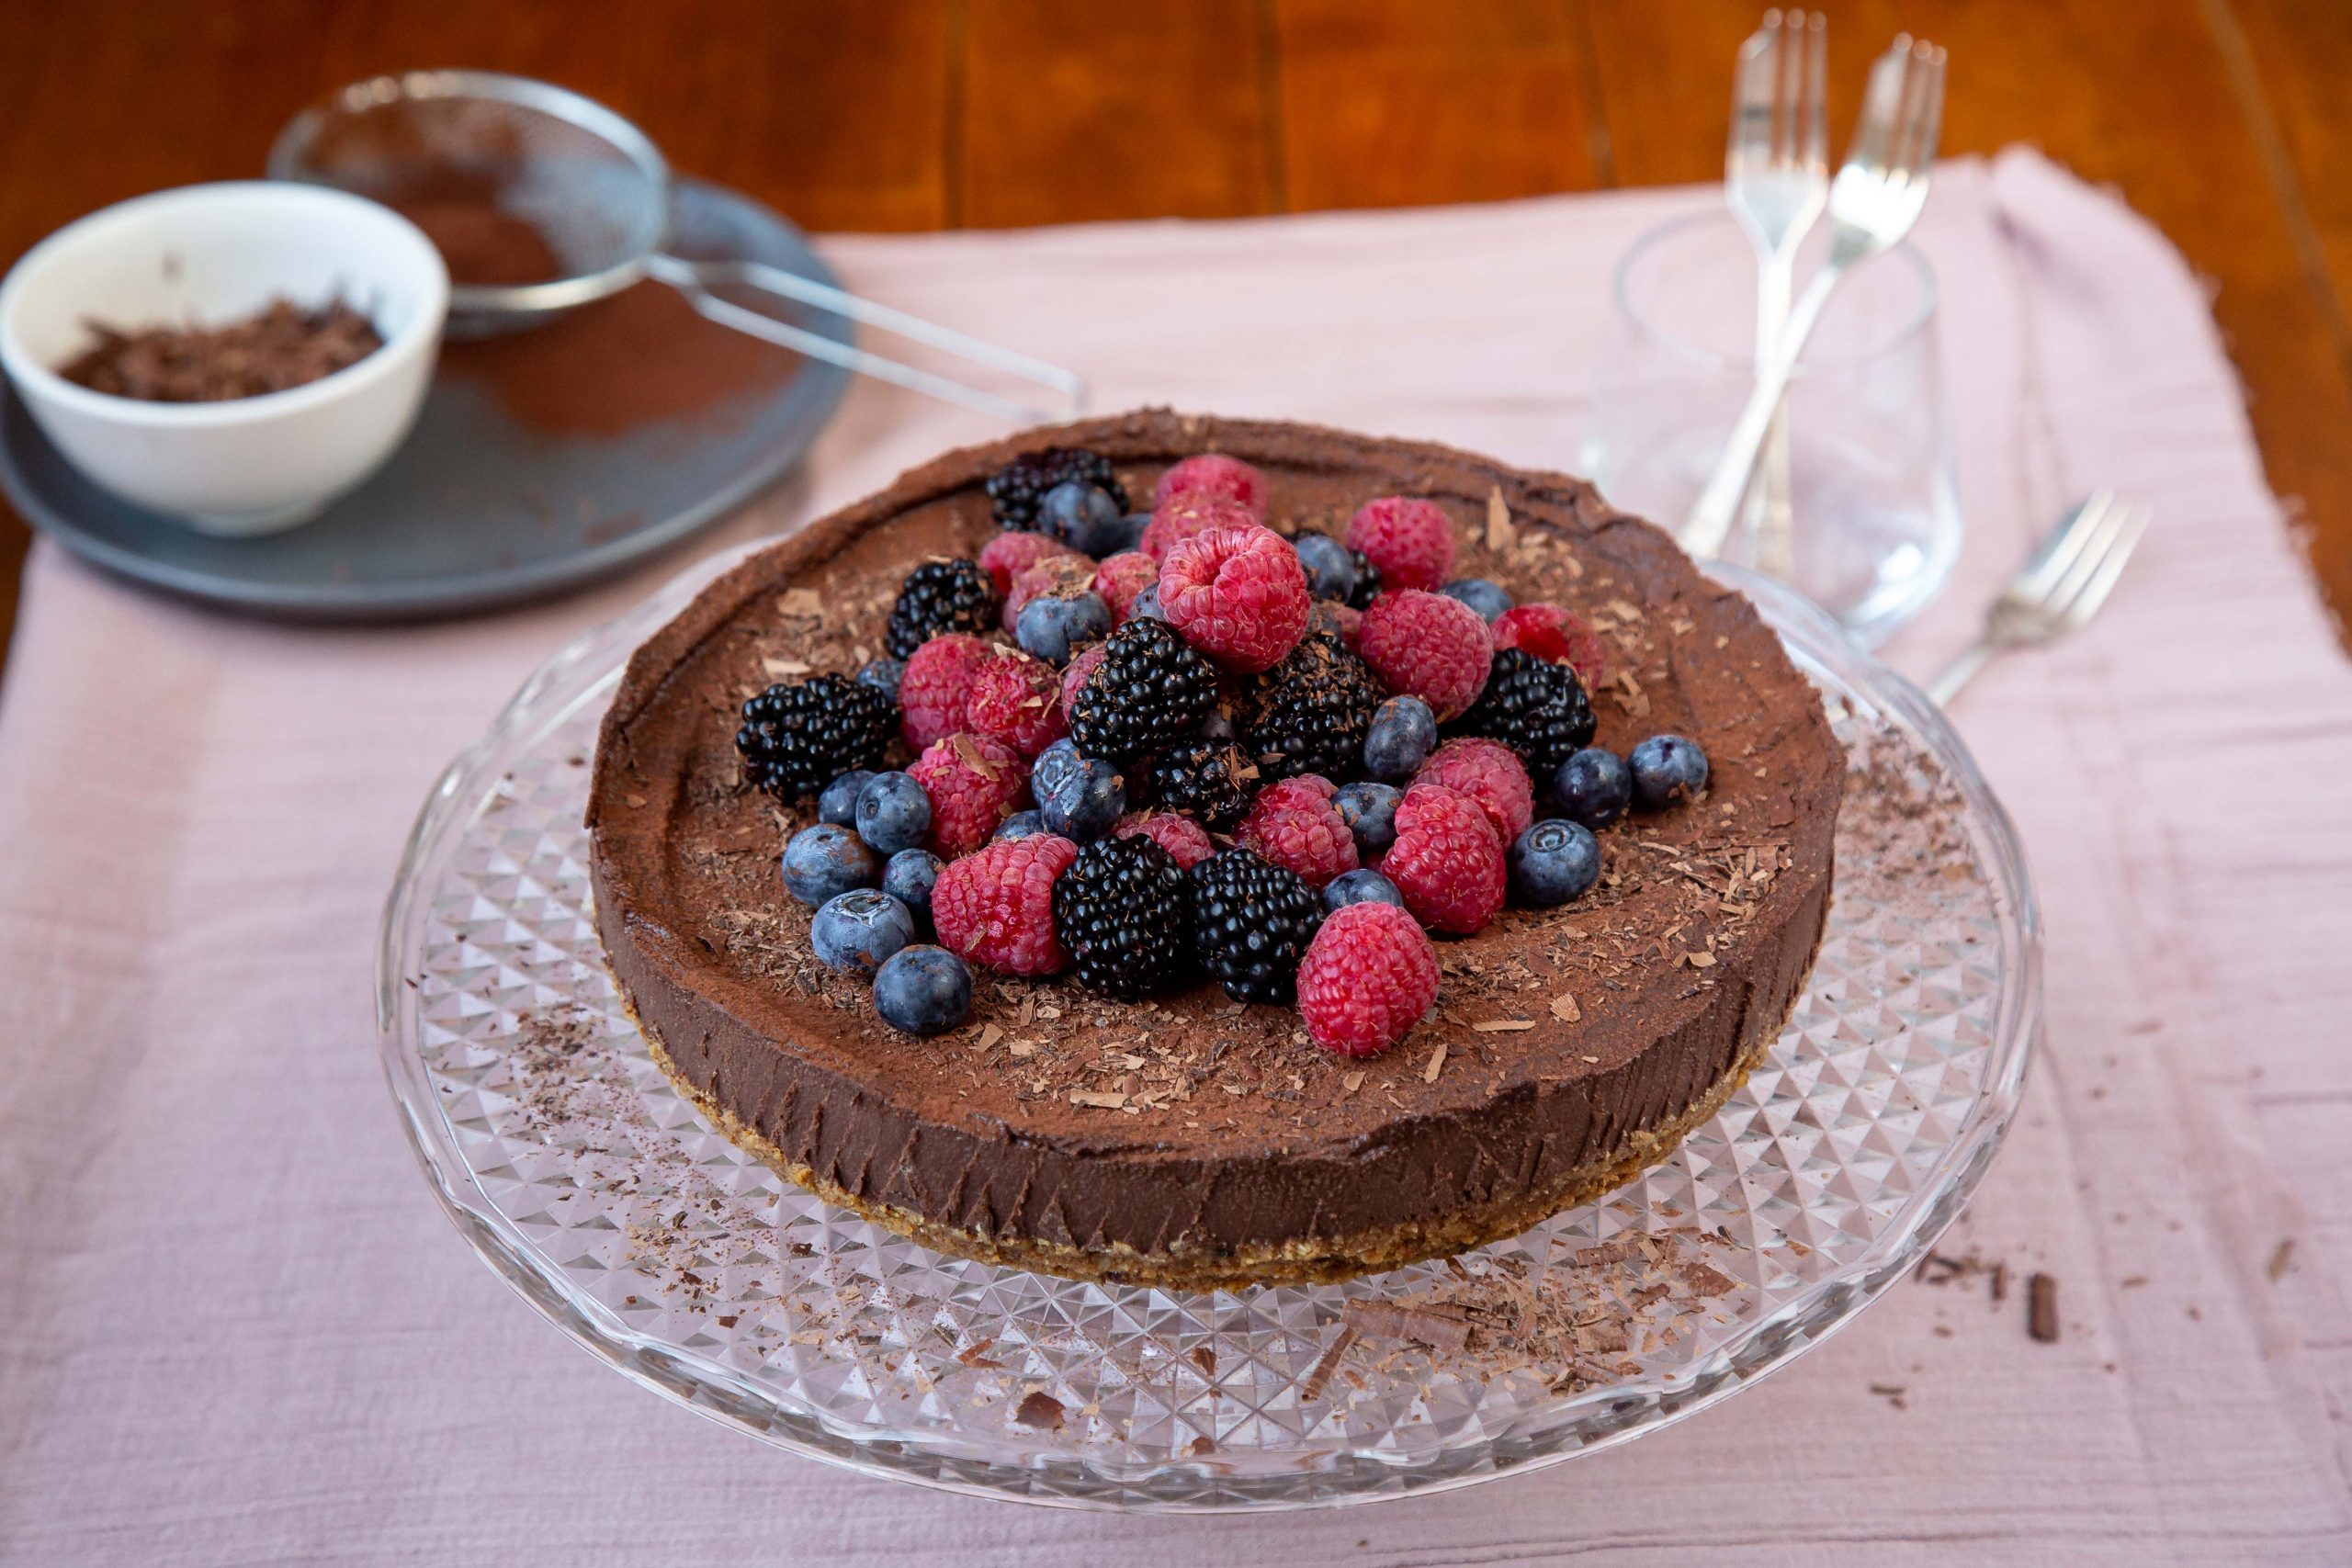 Chocolate cheesecake sits with blueberries and raspberries sprinkled on top sitting on a glass cake stand.